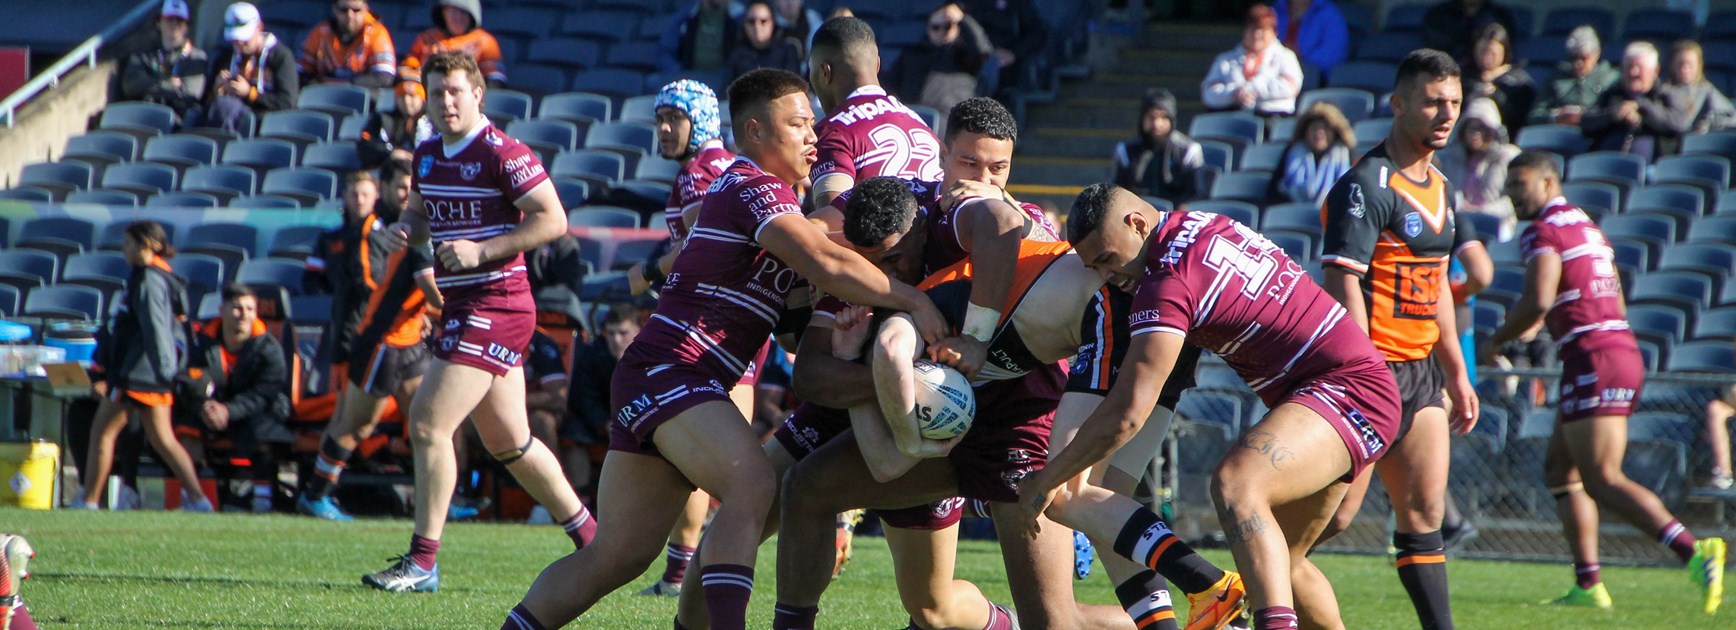 Samuela Fainu scores double in loss to Tigers